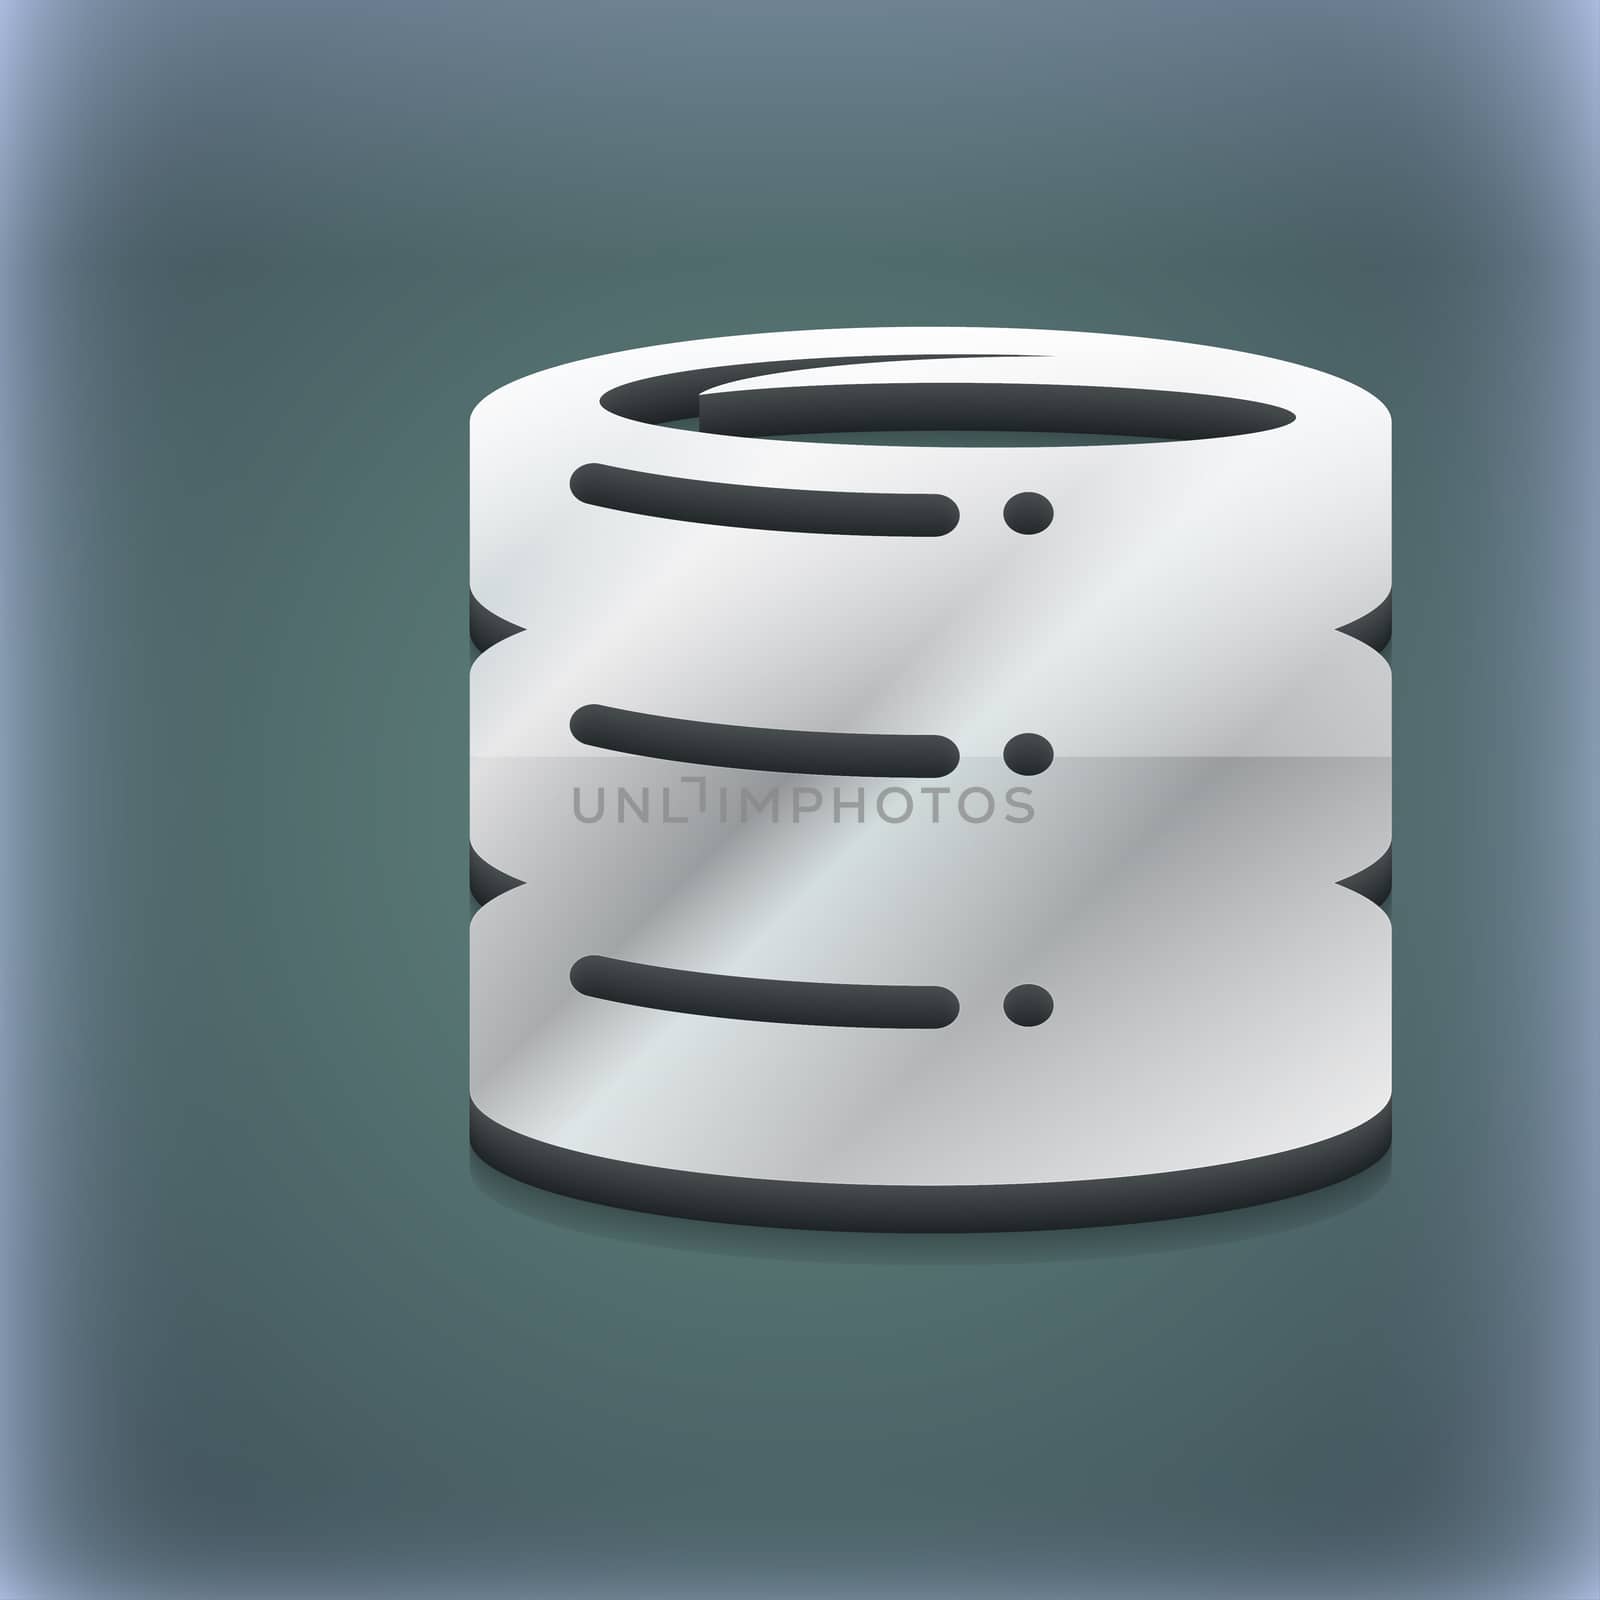 hard drive date base icon symbol. 3D style. Trendy, modern design with space for your text illustration. Raster version